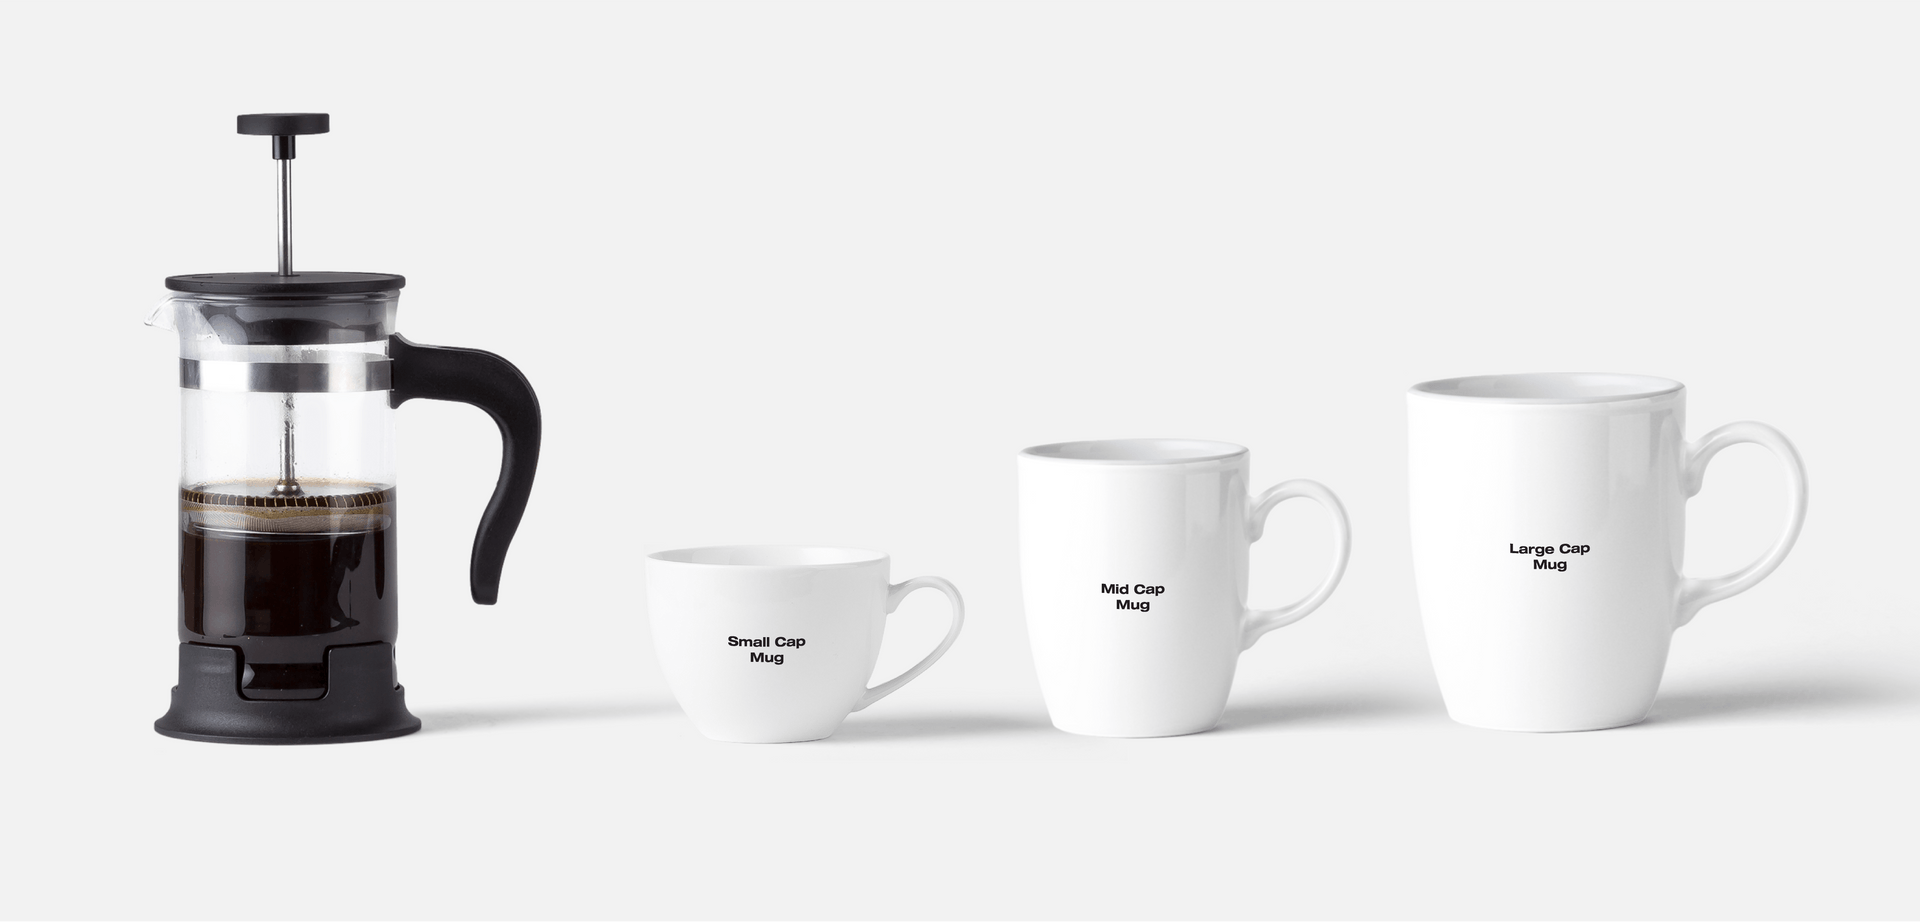 16-mugvariations-valueresearch@2x.png